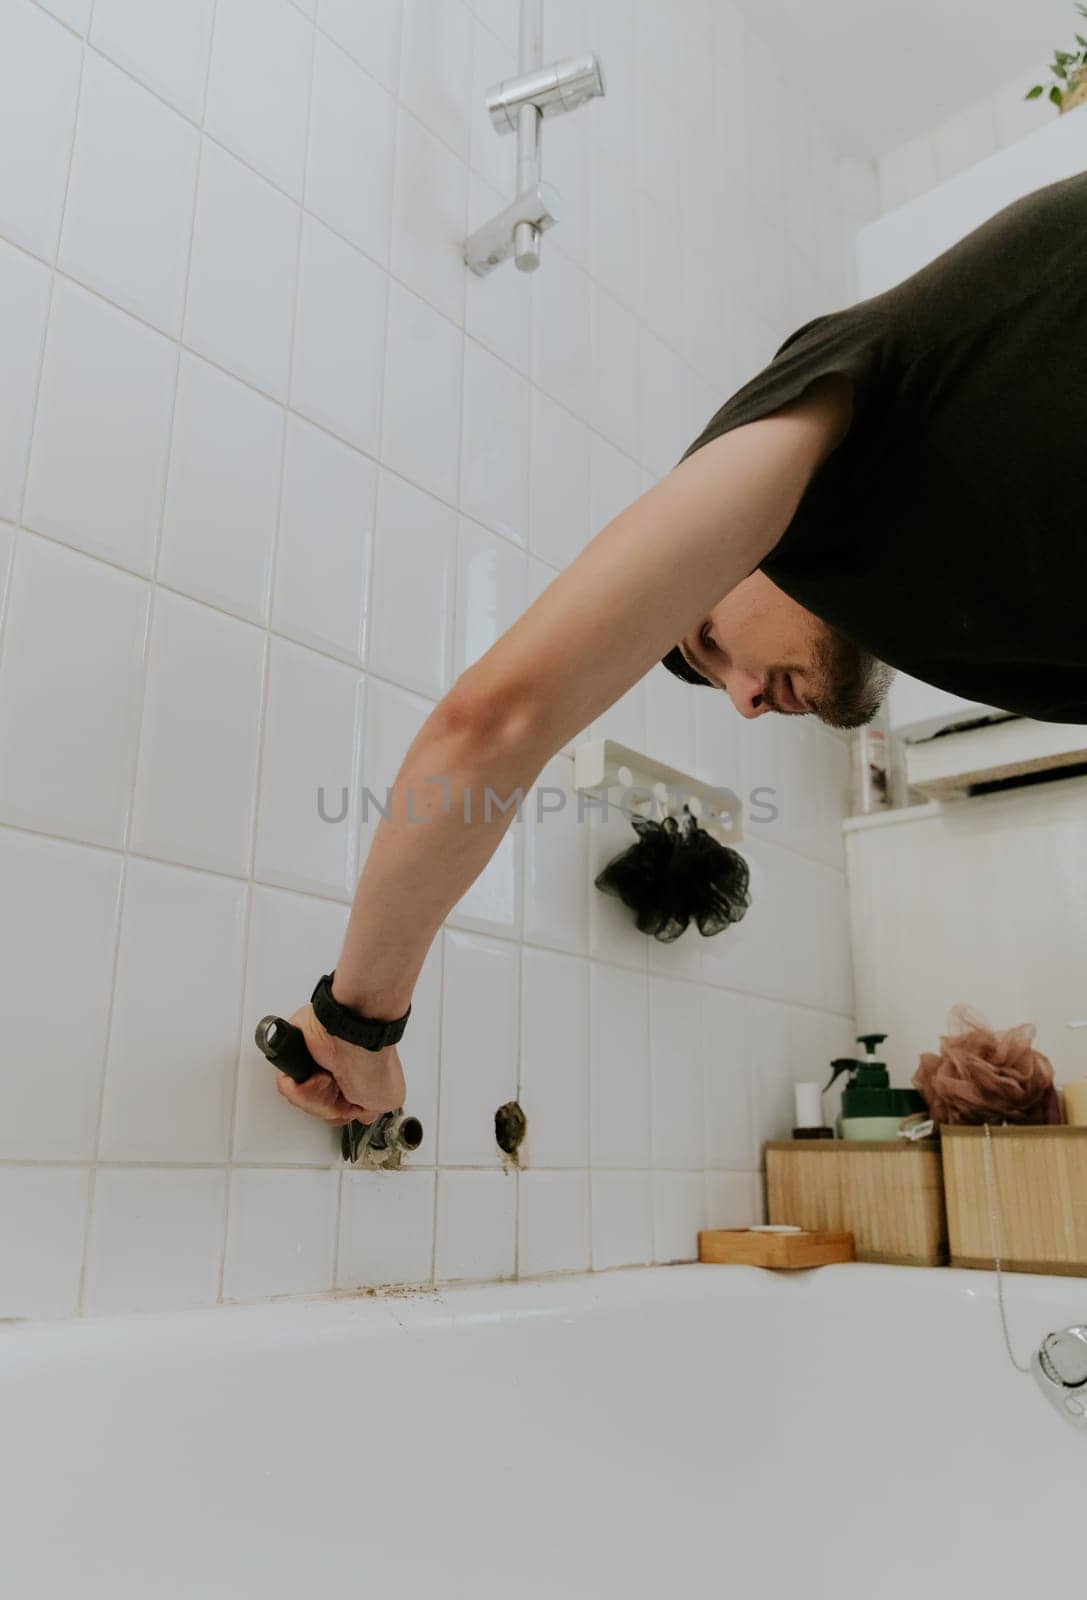 One young Caucasian recognizable man cleans with a screwdriver a hole in a tiled wall with a faucet tube in the bathroom, standing at an angle, close-up side view.Step by step.